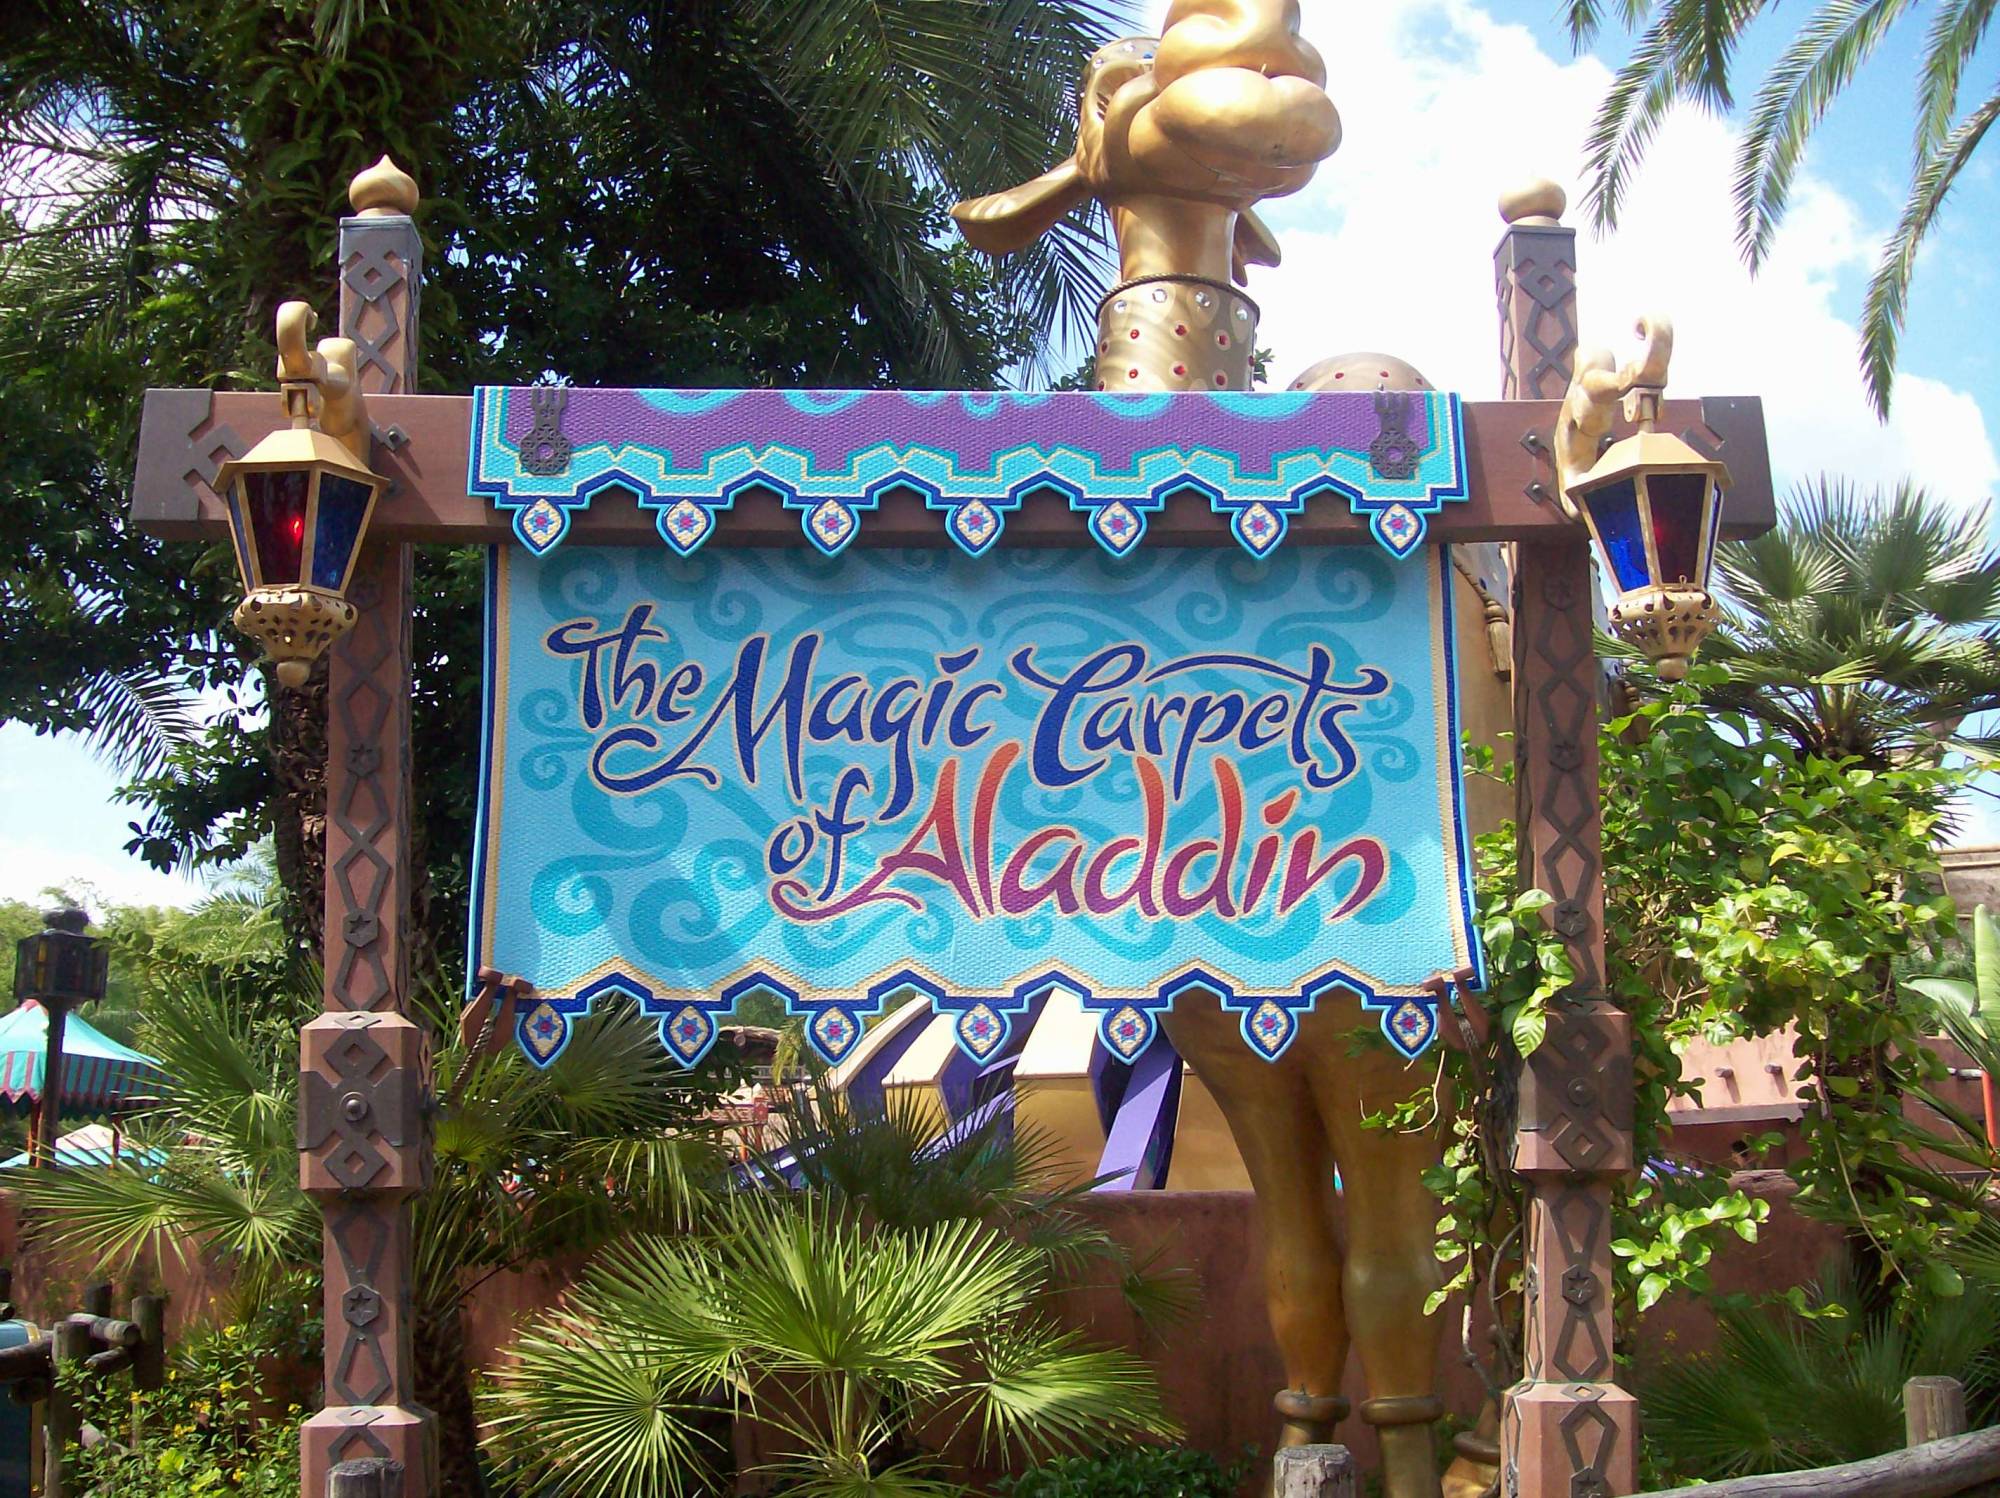 Aladdin's Magic Carpet Ride (Watch out for that camel!)